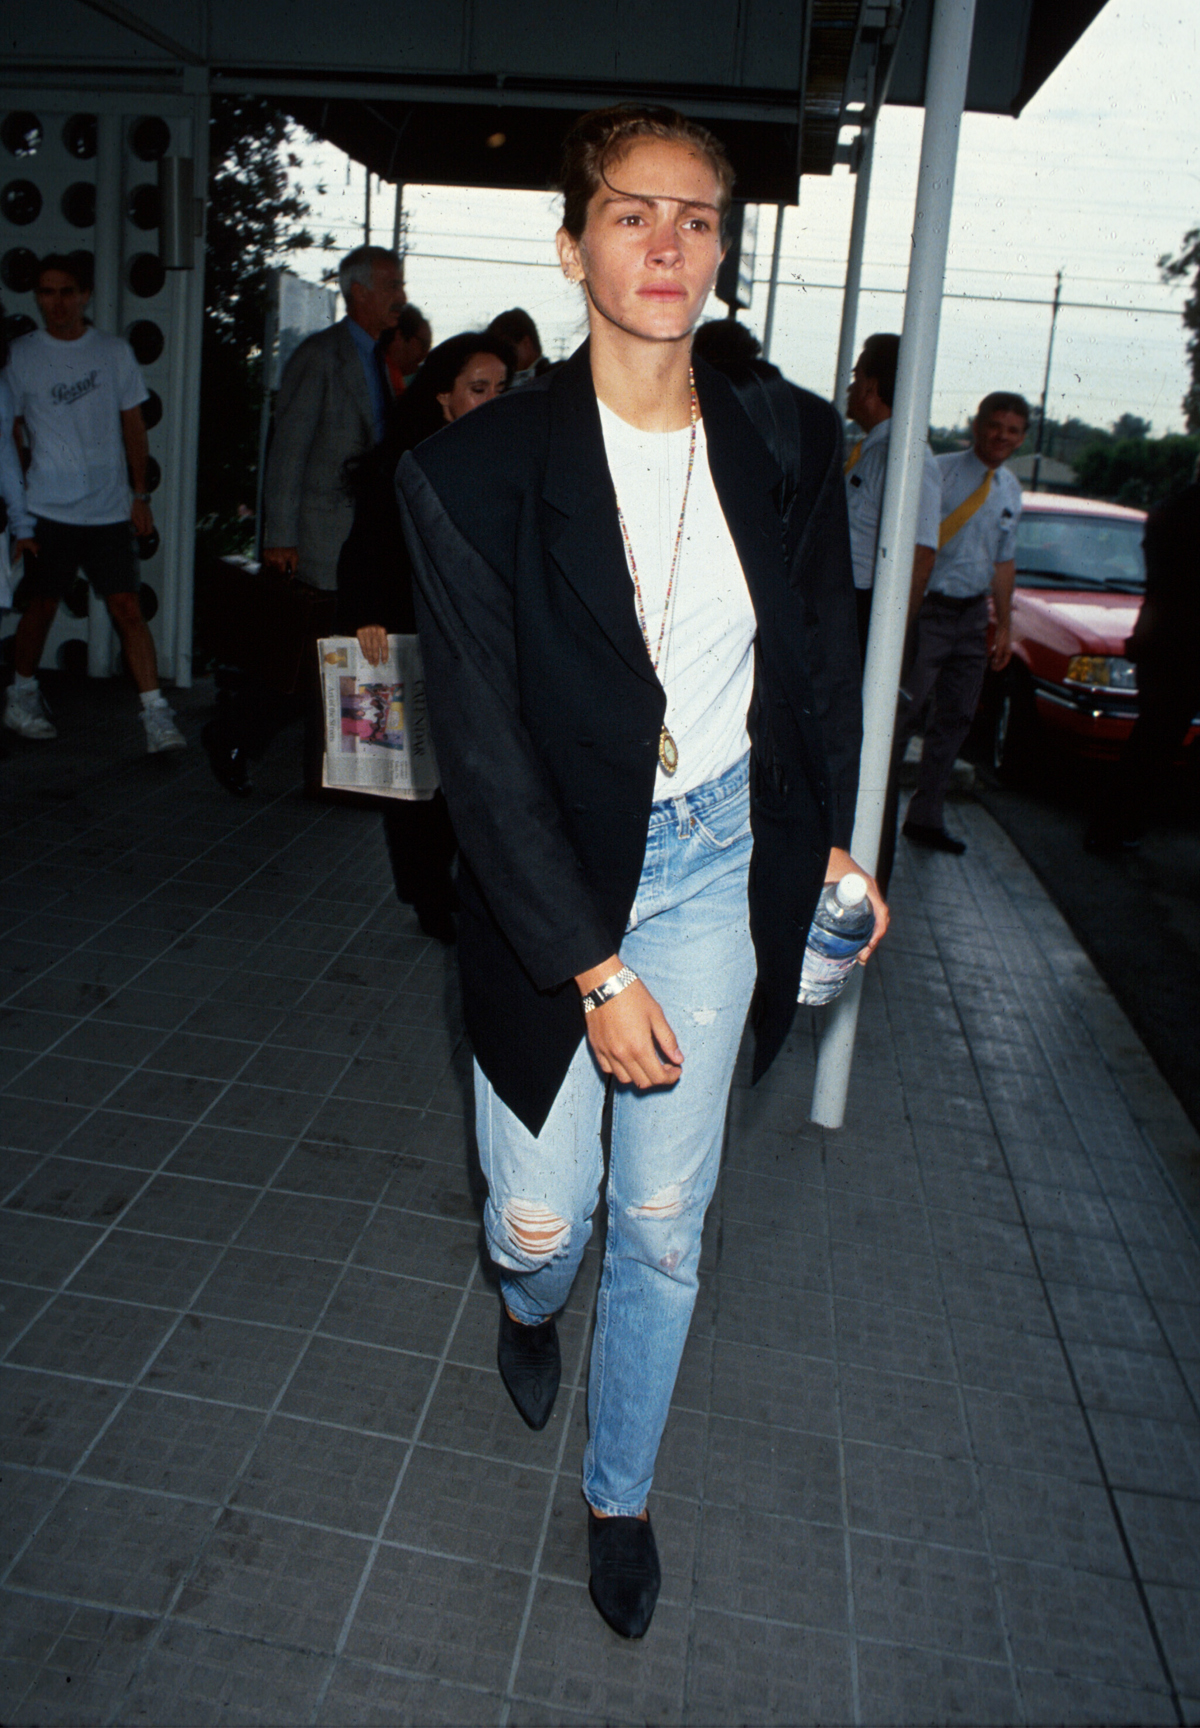 Julia Roberts Style: Wearing jeans and an oversized blazer